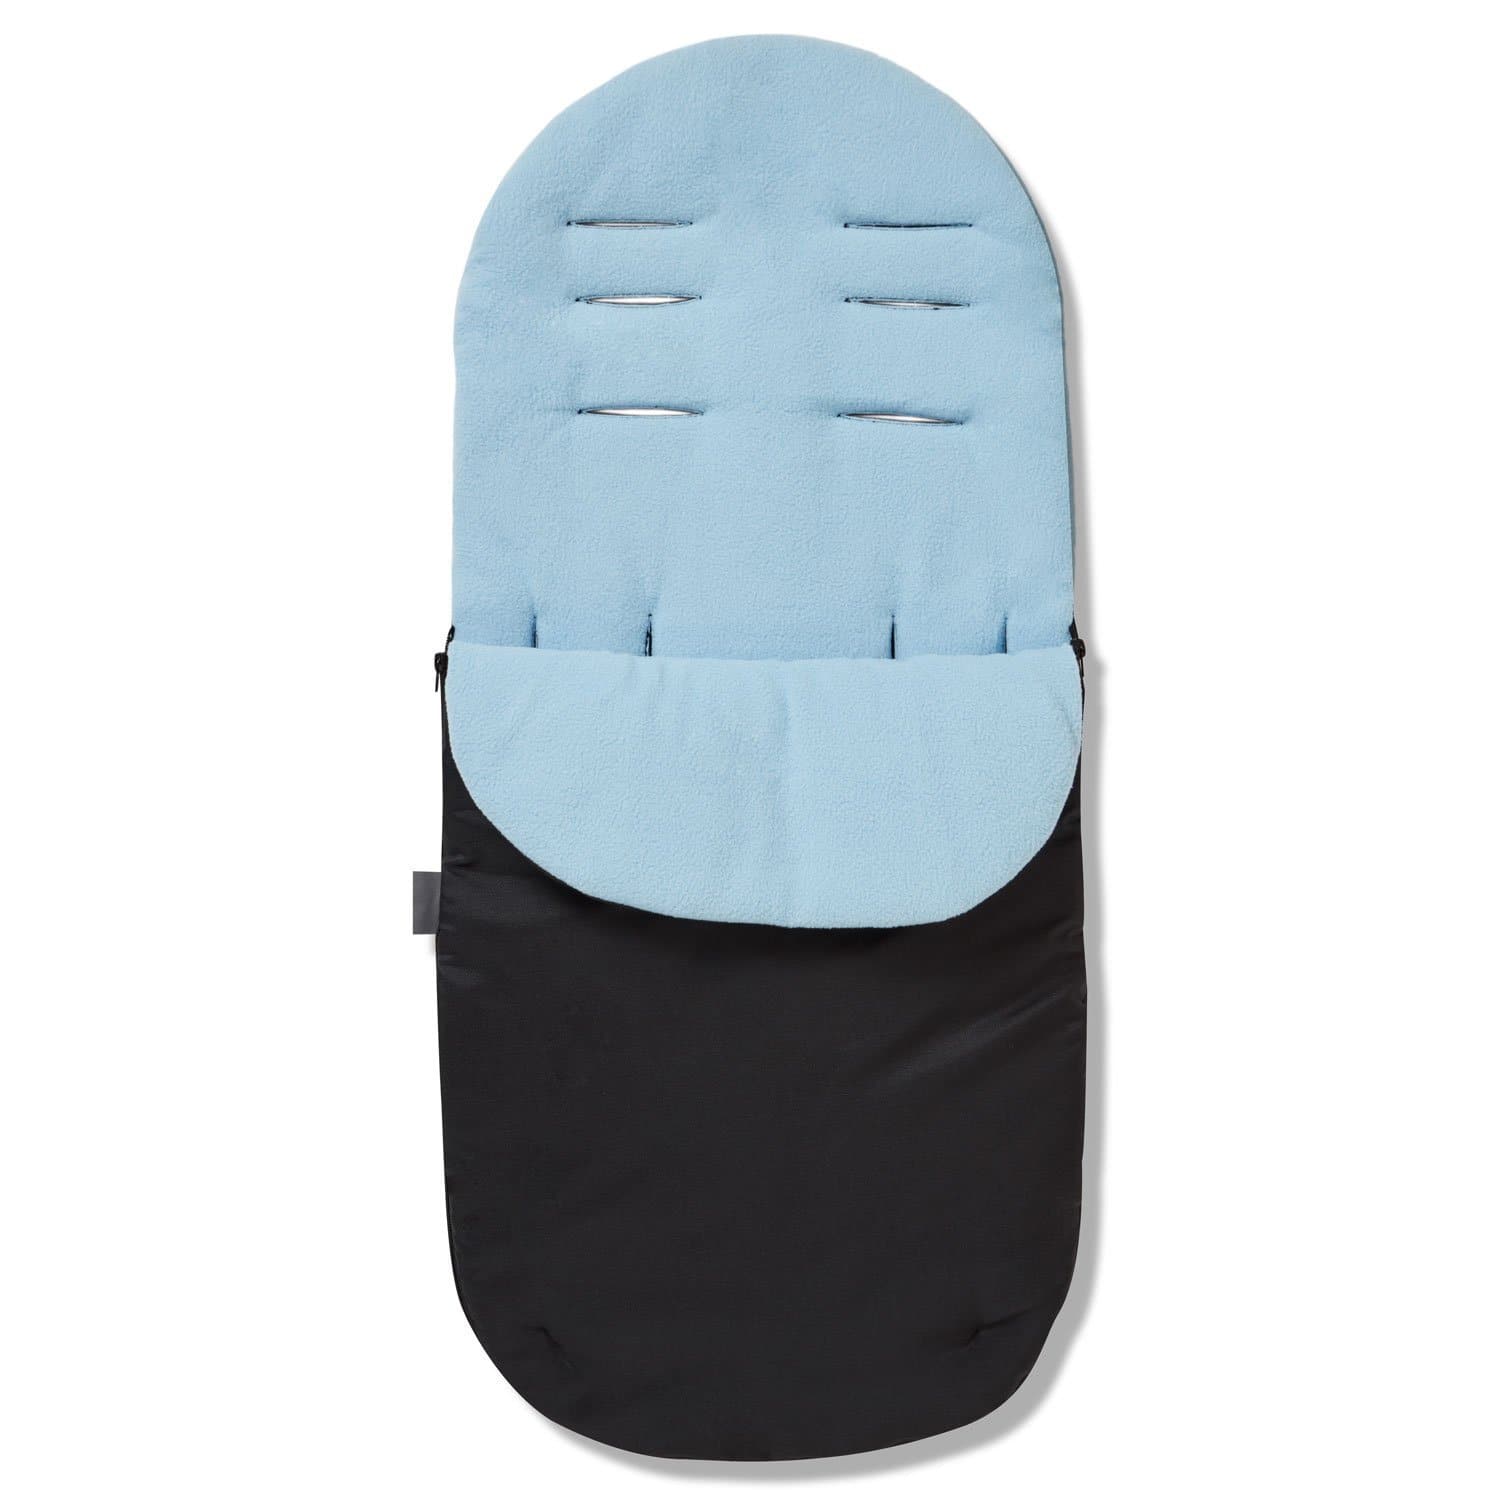 Footmuff / Cosy Toes Compatible with Nurse - Light Blue / Fits All Models | For Your Little One